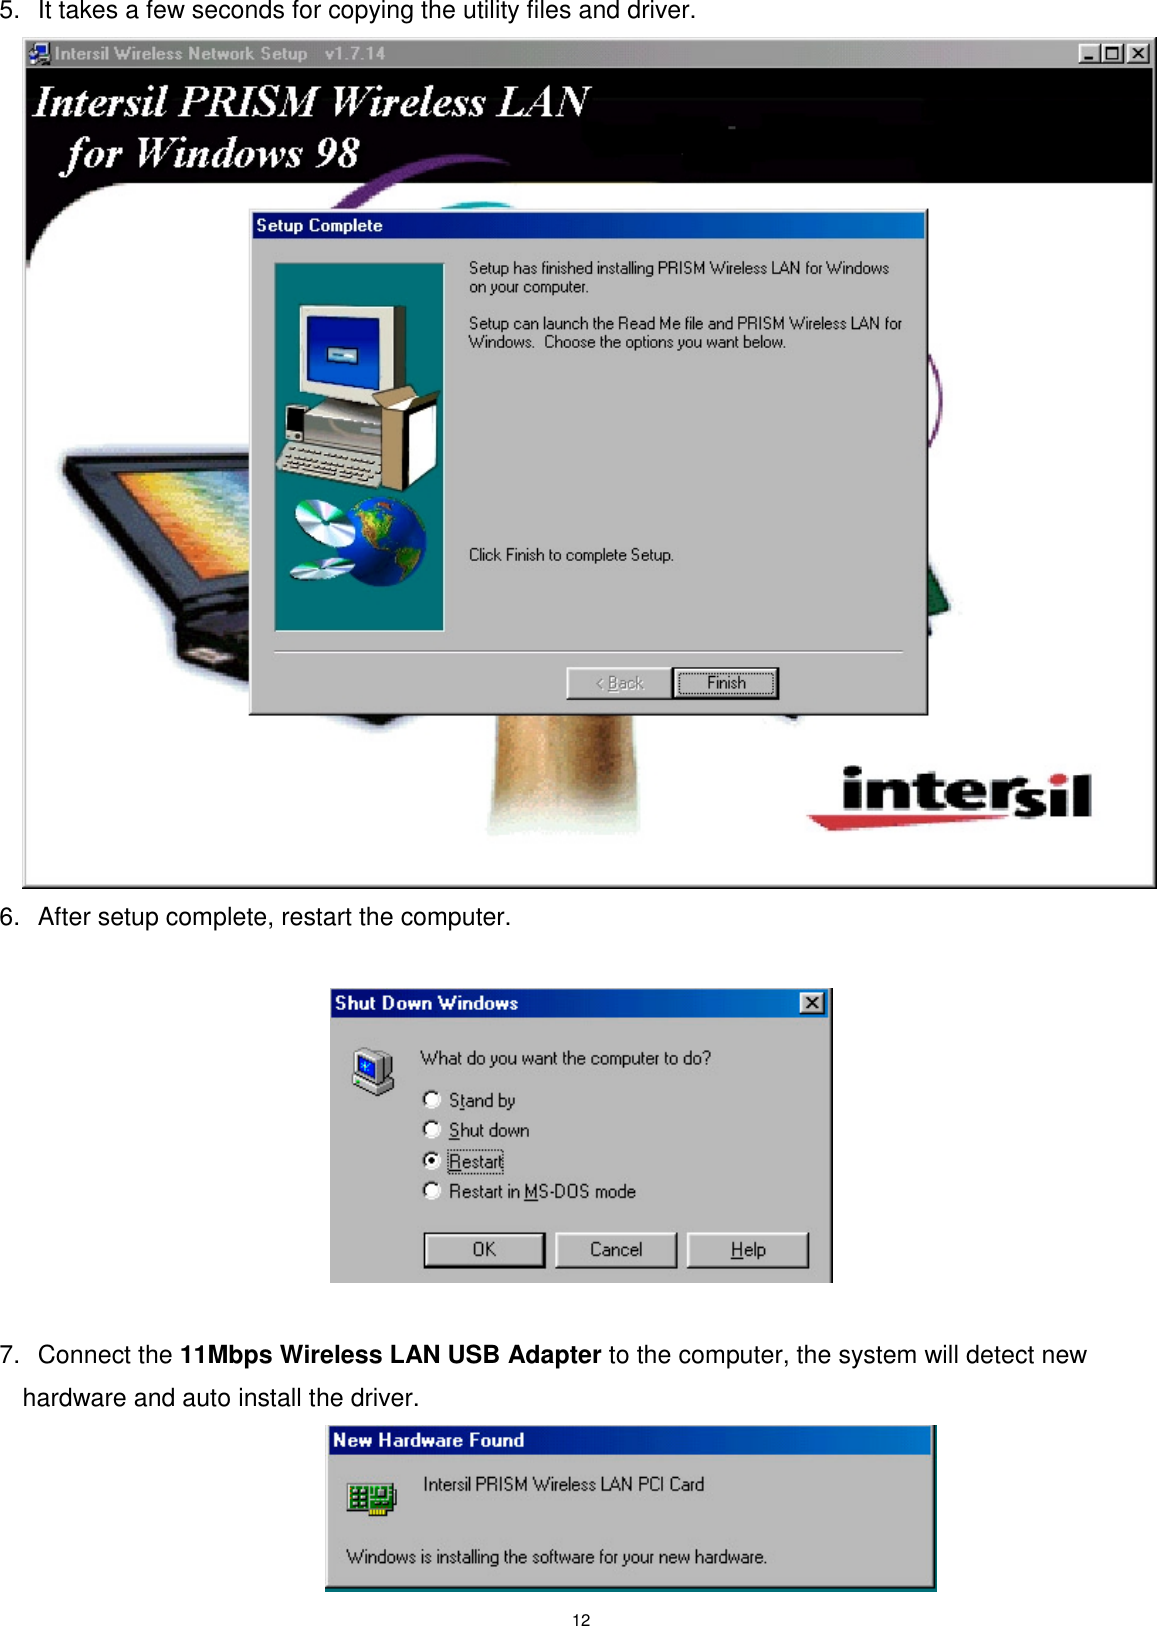 125.  It takes a few seconds for copying the utility files and driver.6.  After setup complete, restart the computer.  7. Connect the 11Mbps Wireless LAN USB Adapter to the computer, the system will detect newhardware and auto install the driver.                                               